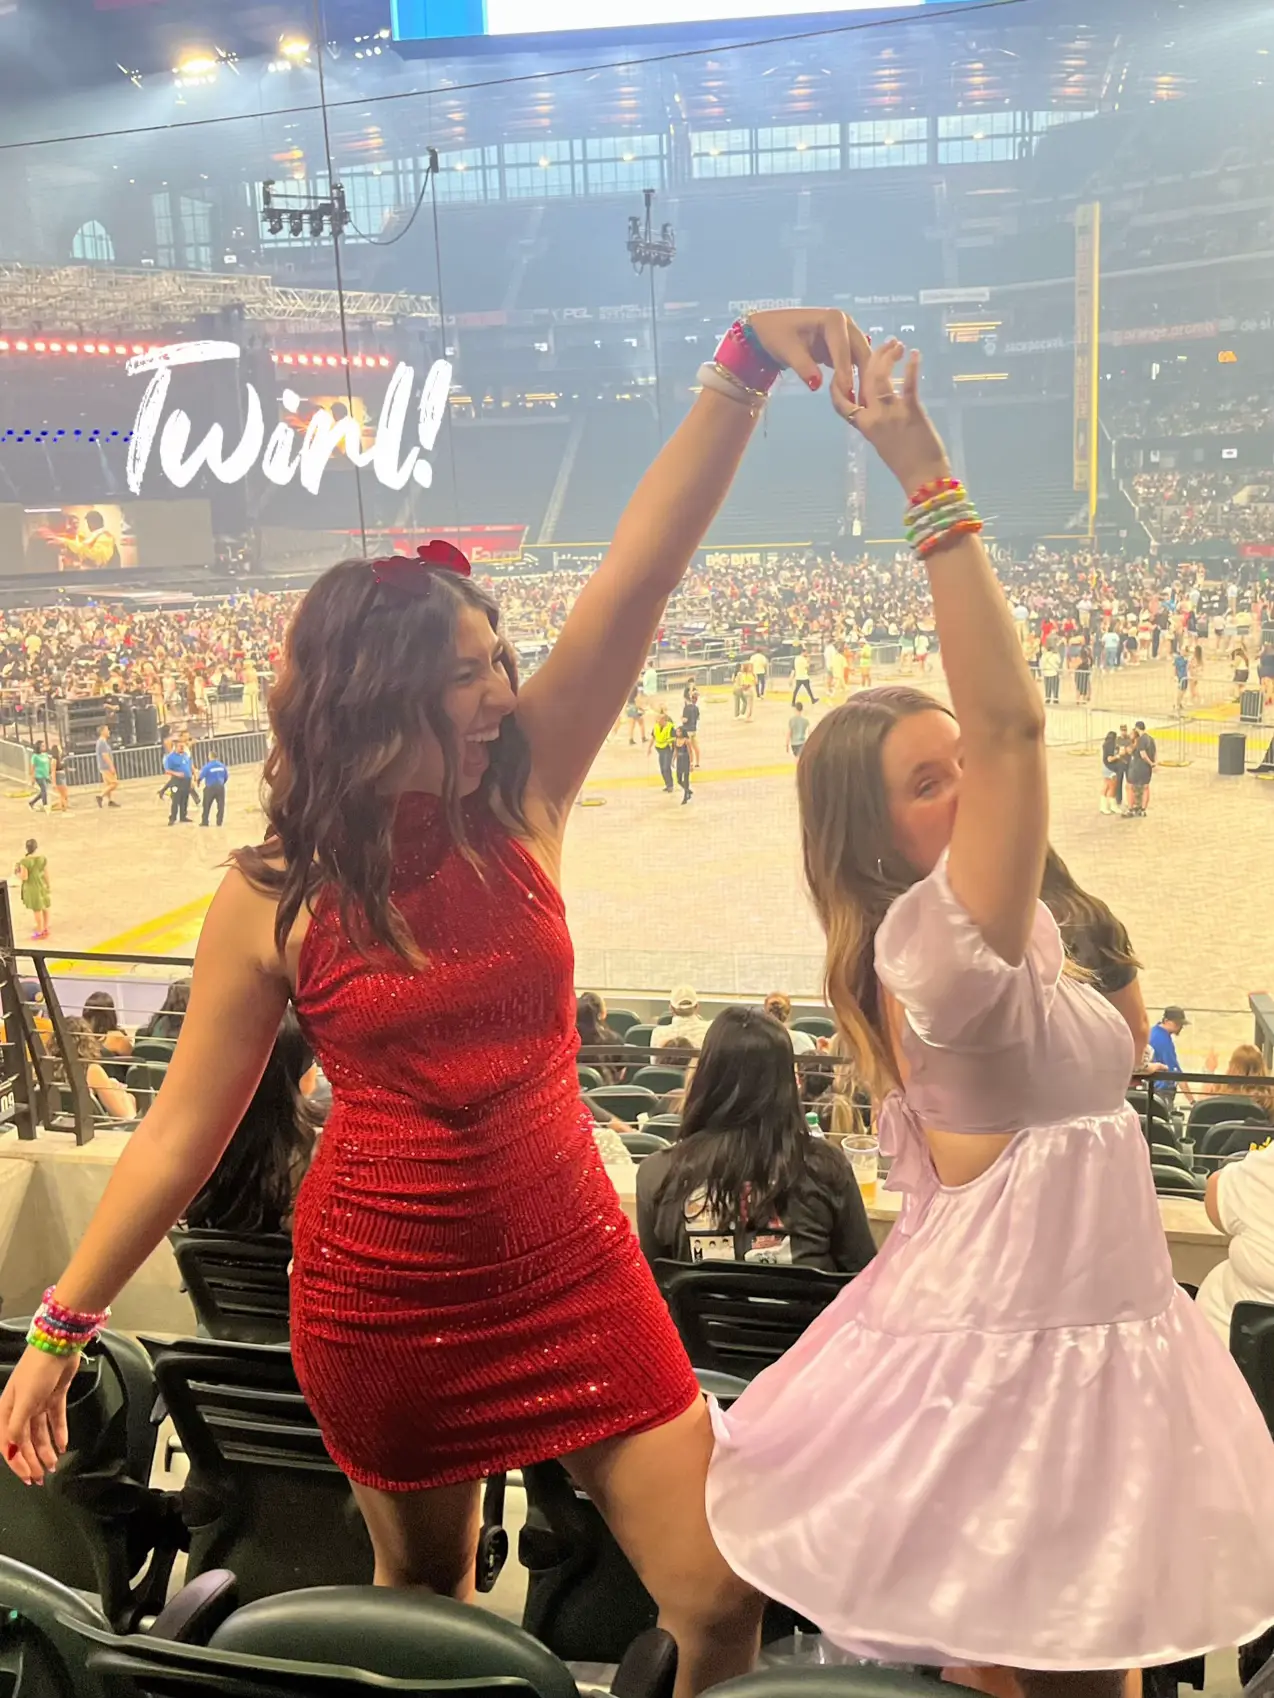  Two women in red dresses are standing in a stadium.